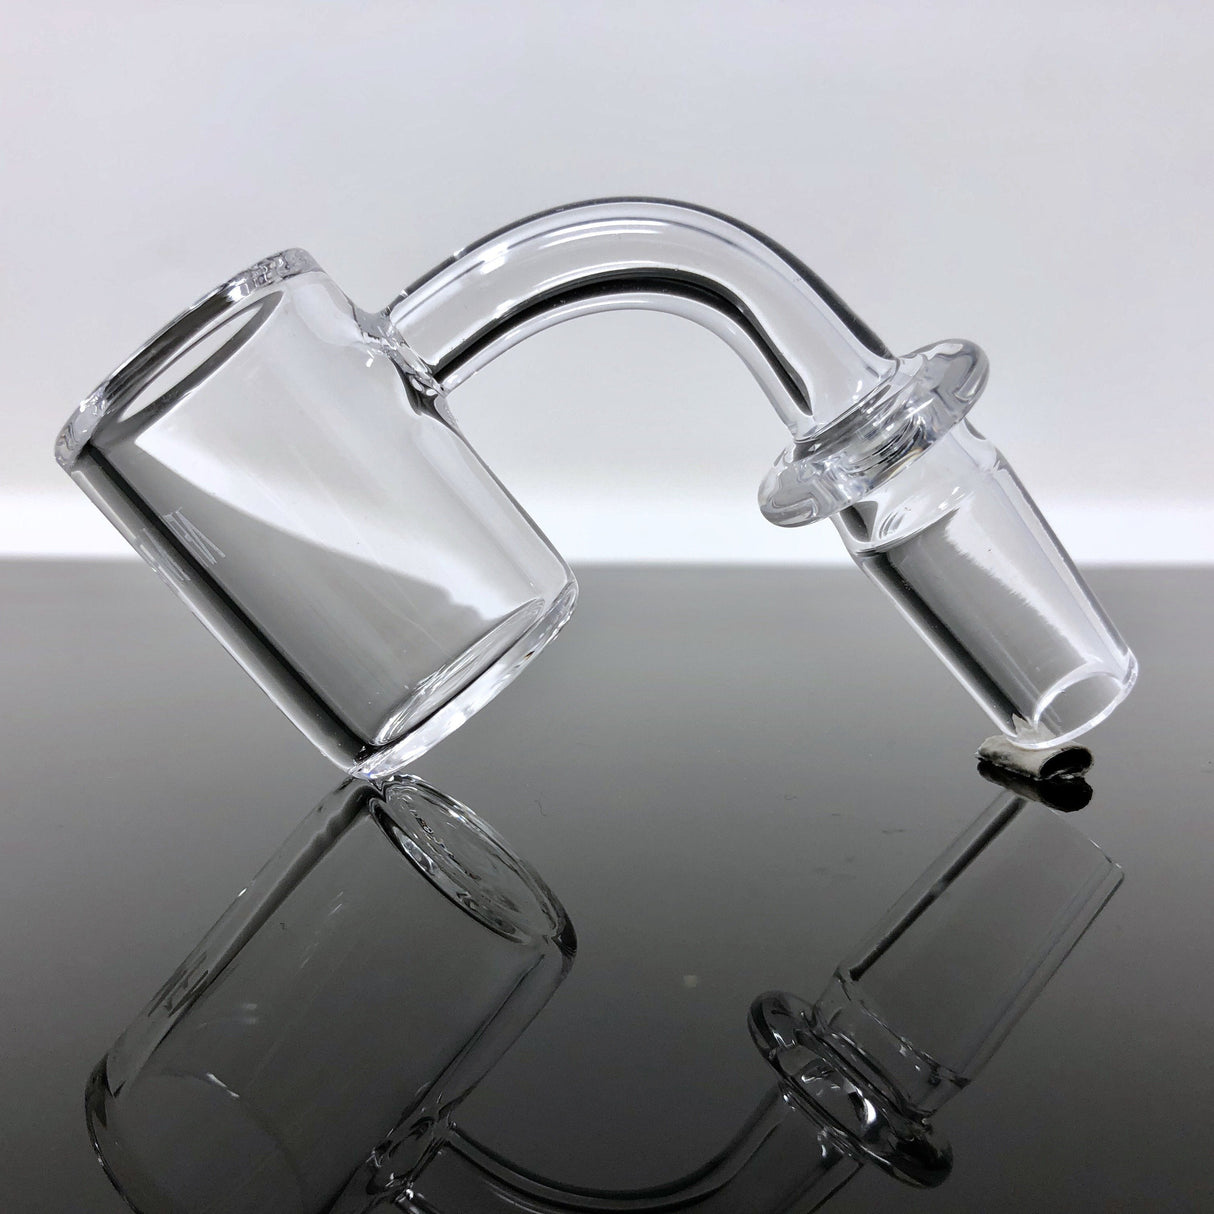 AFM Quartz Banger with Beveled Edge 3mm Thick 25mm Wide for Dab Rigs, Side View